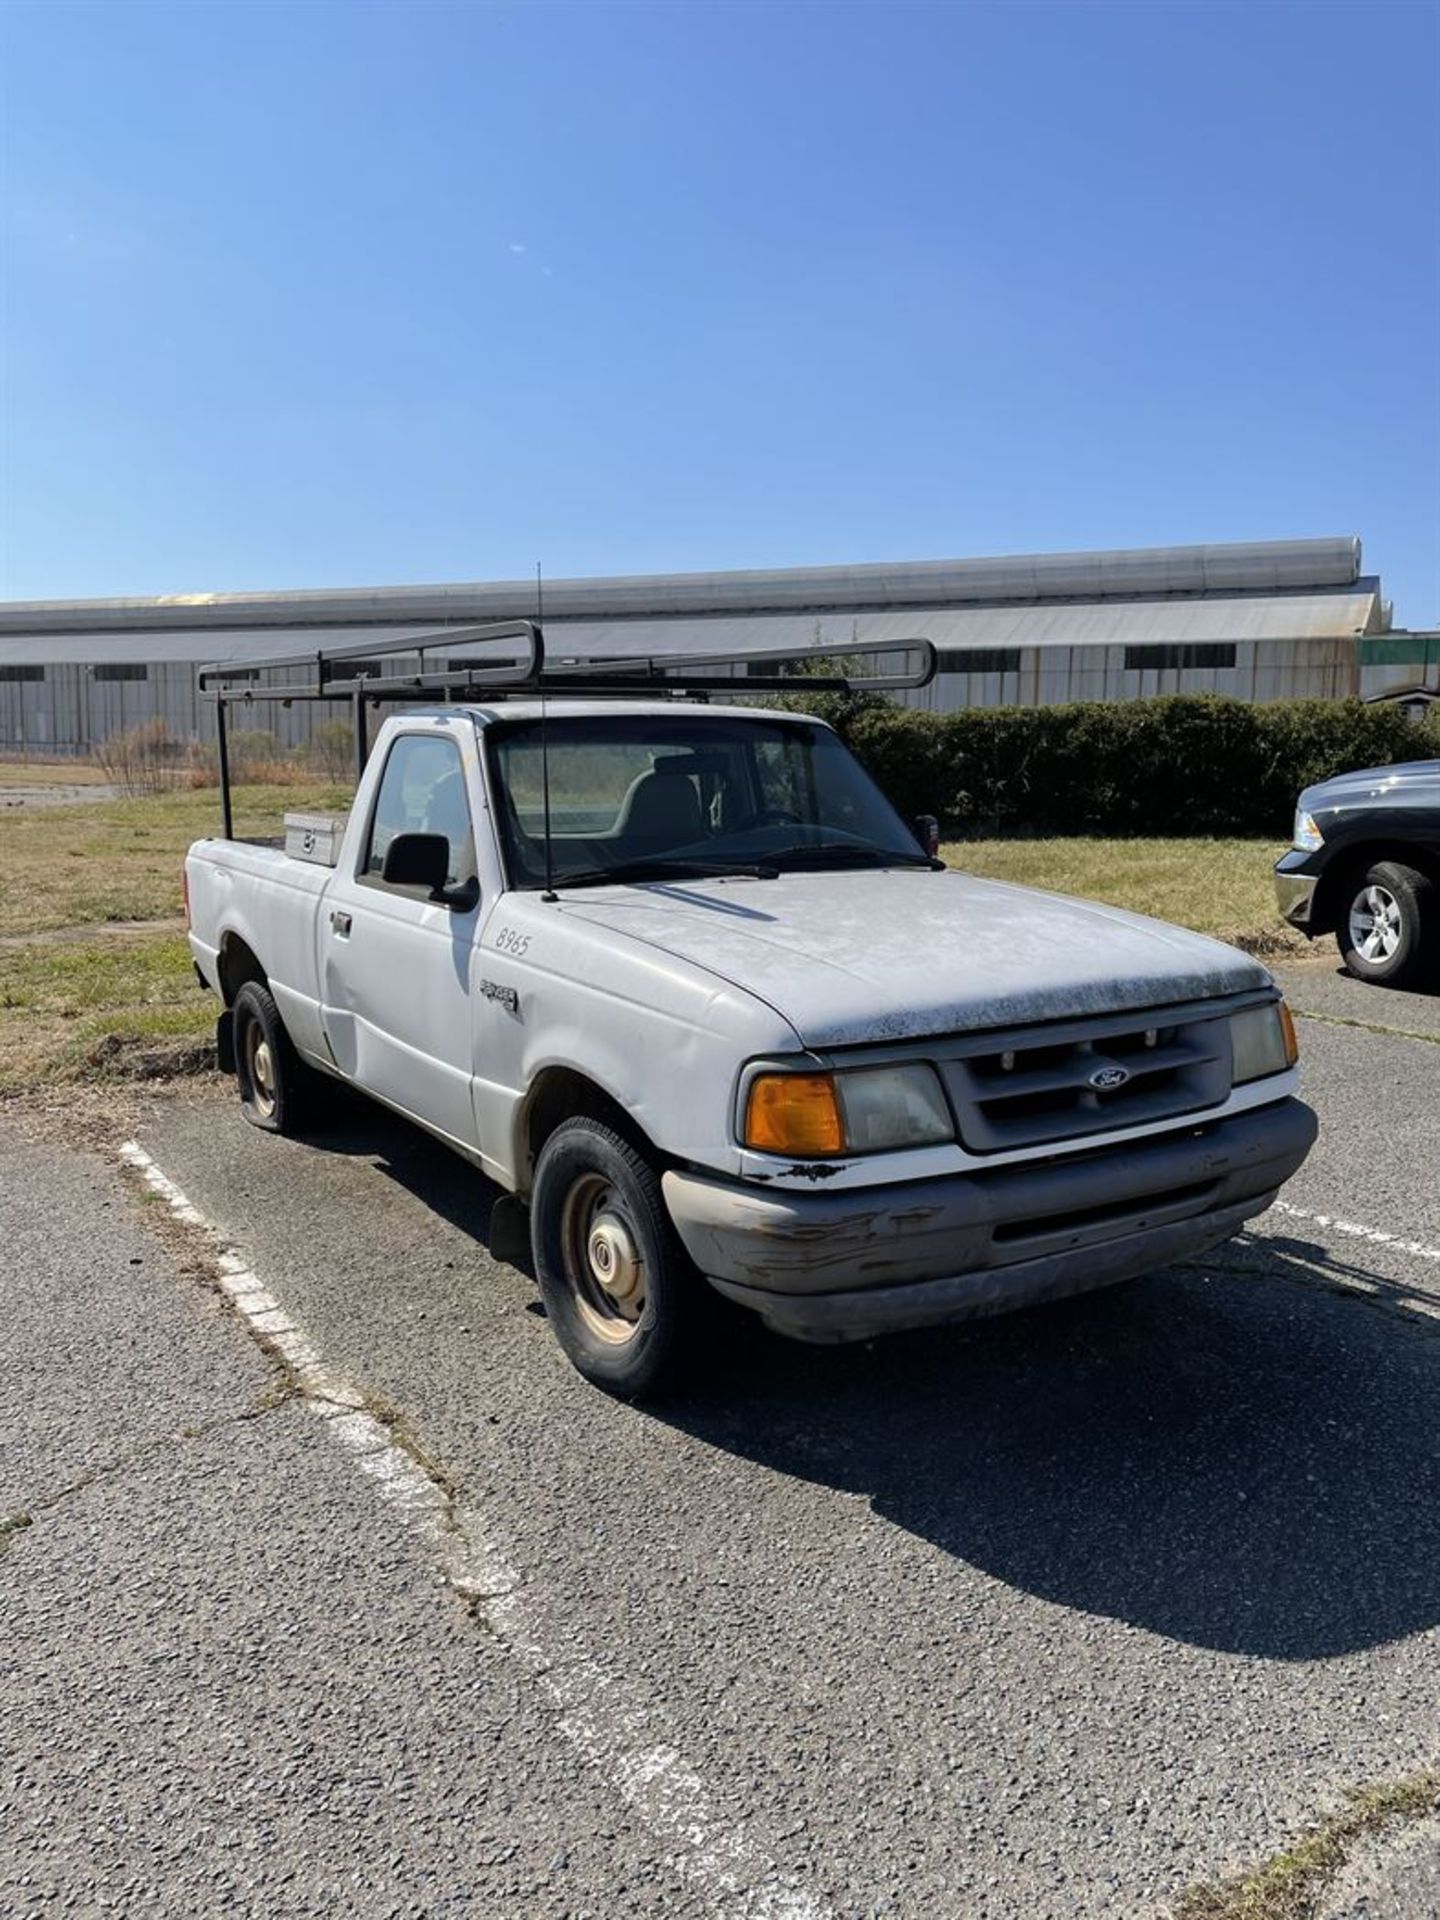 Ford Ranger Pickup Truck, No Title (Condition Unknown) - Image 2 of 4